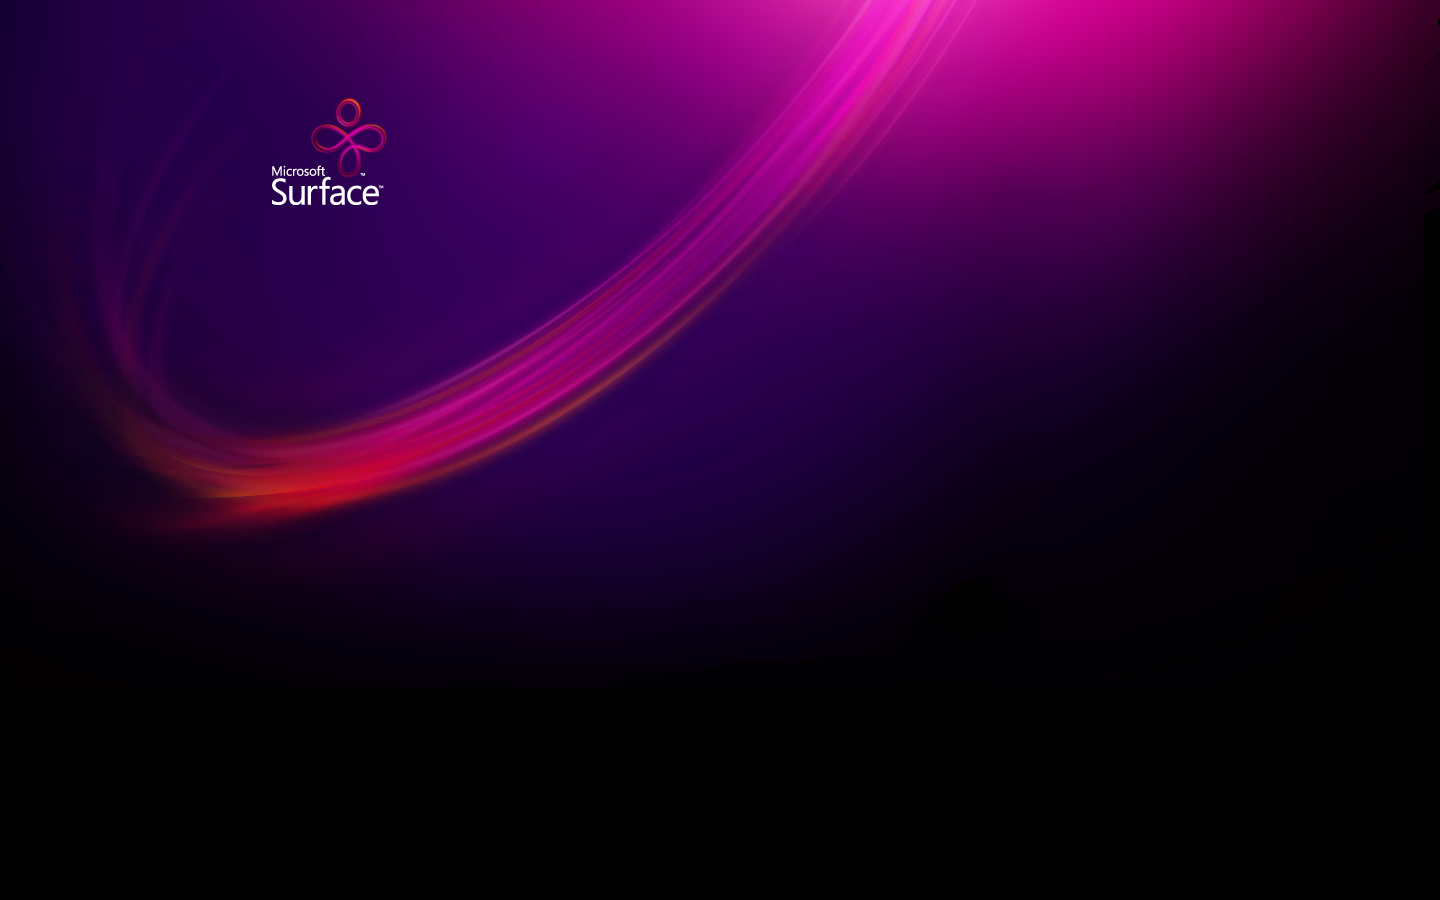 Microsoft Surface Wallpaper And Hidden Image On Website Hints At Multi